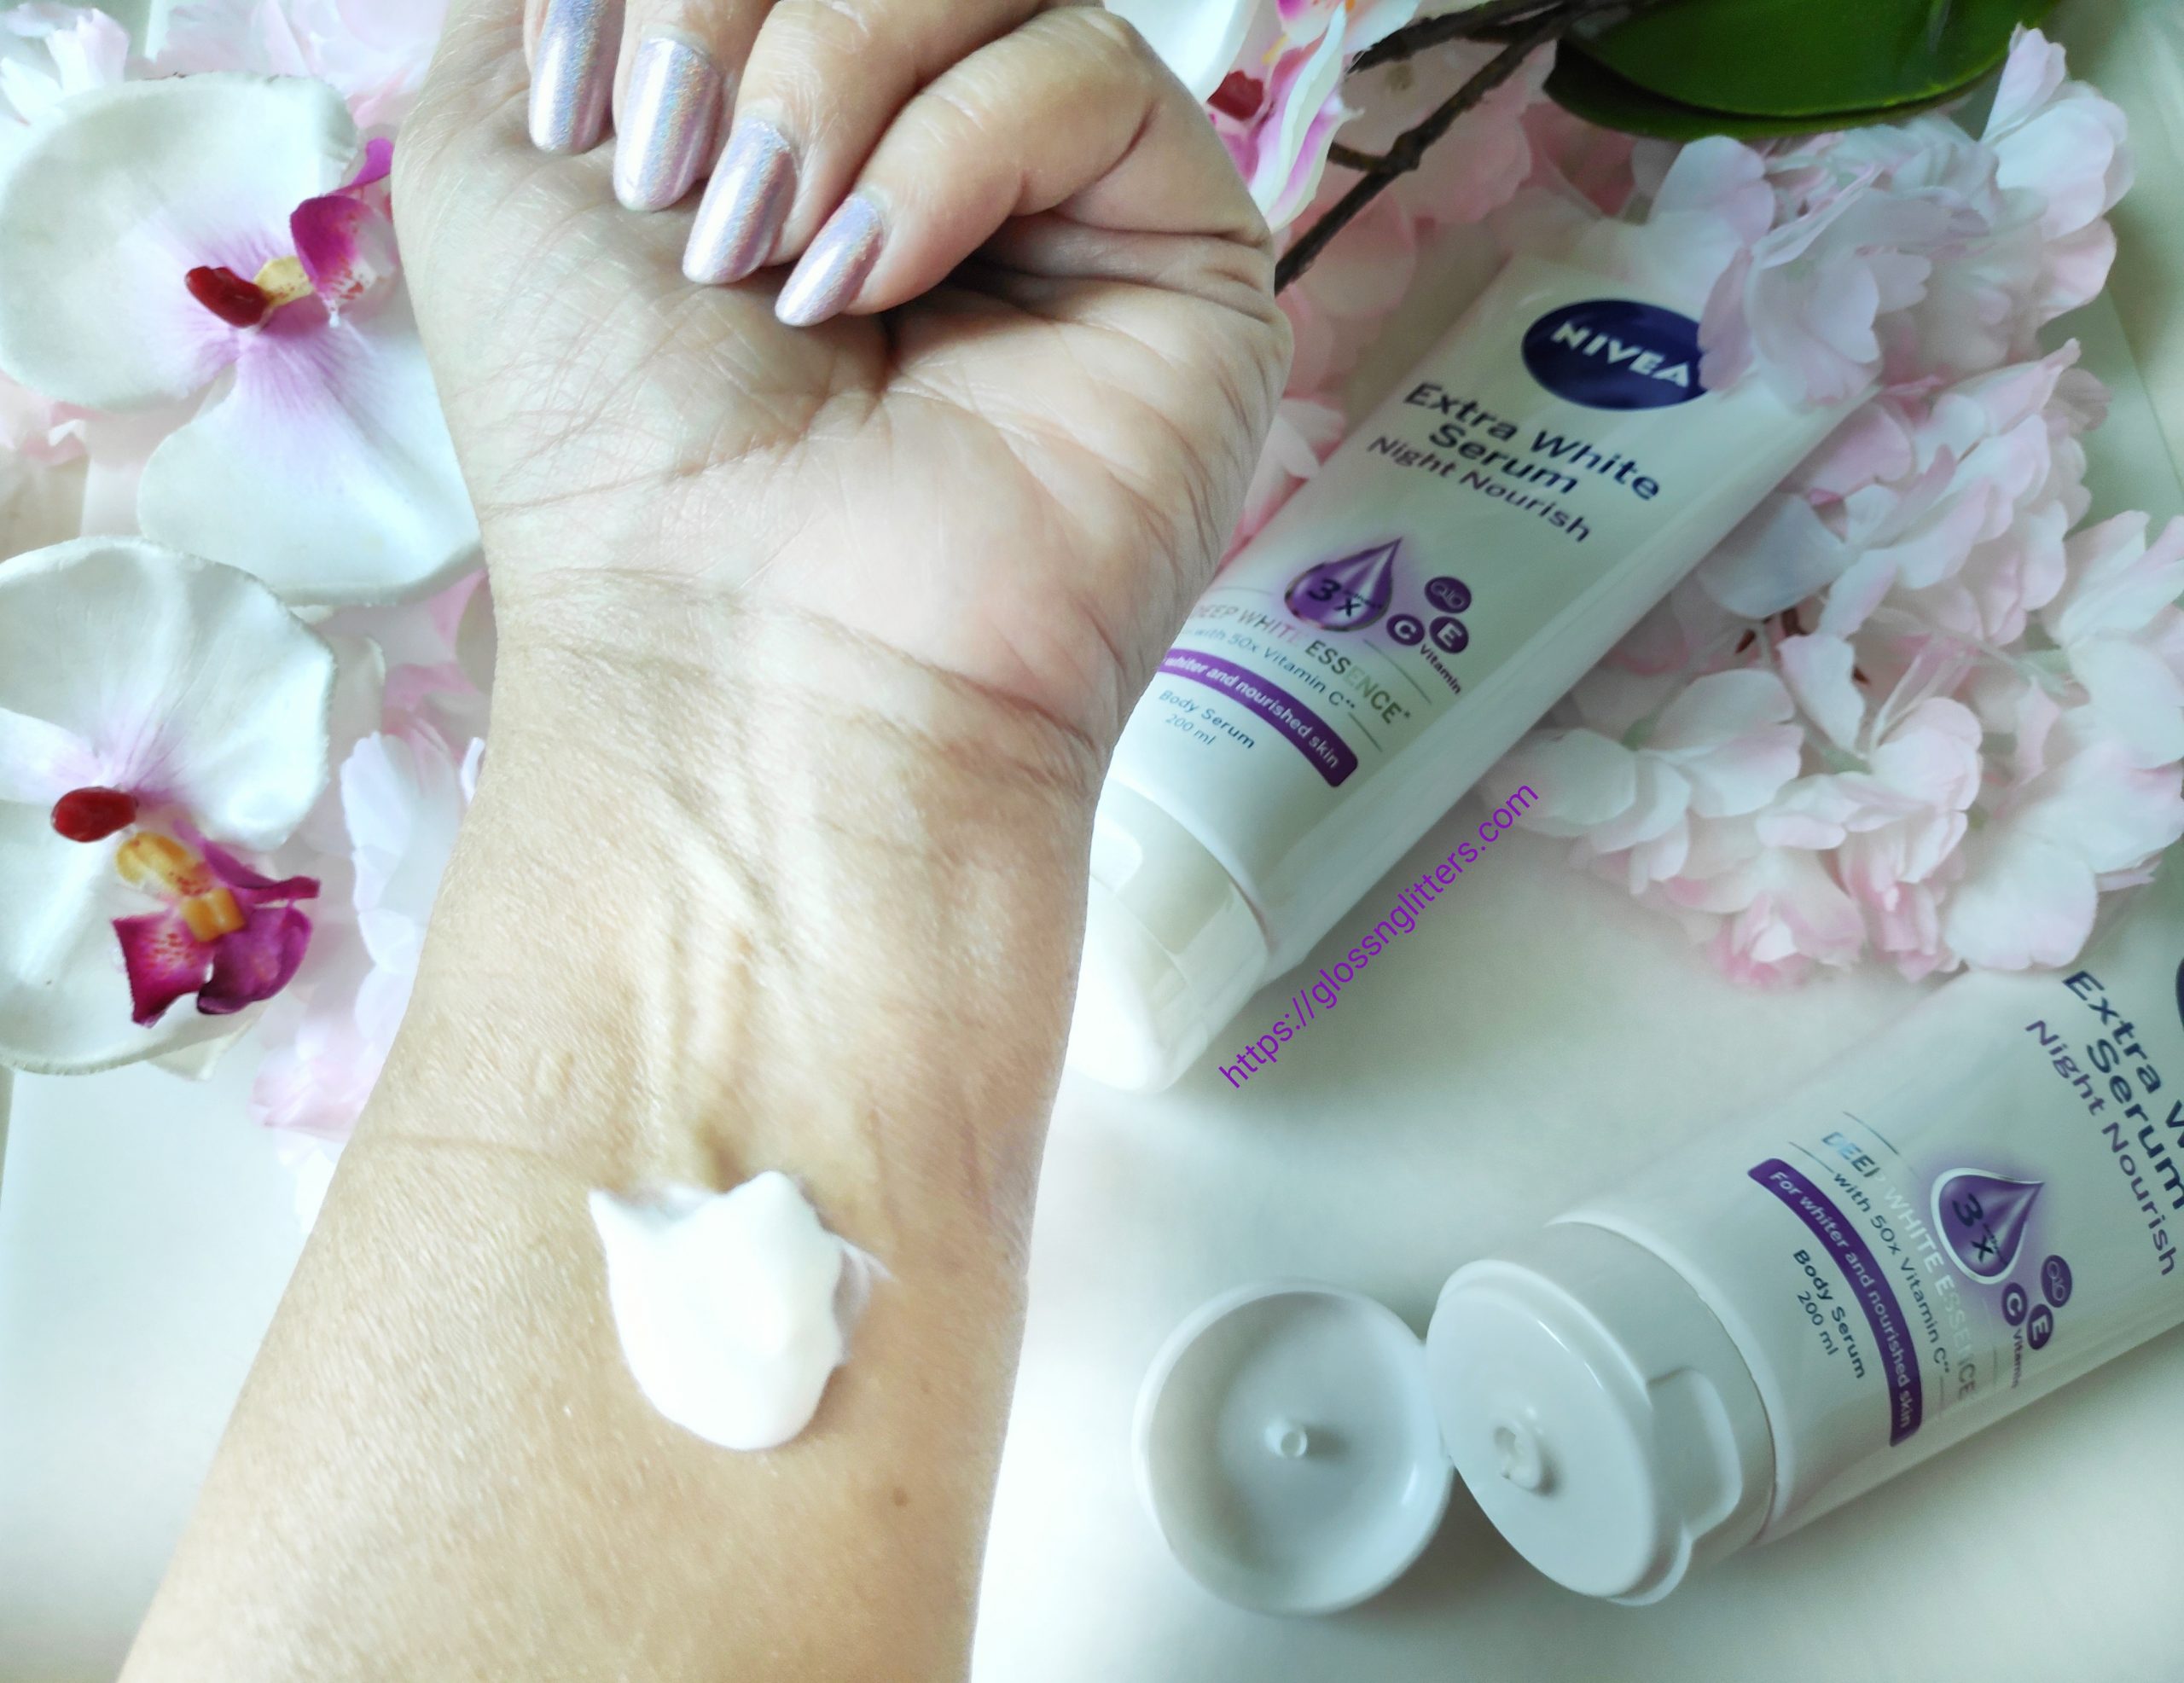 NIVEA Night White Firming Body Serum Review and Swatch